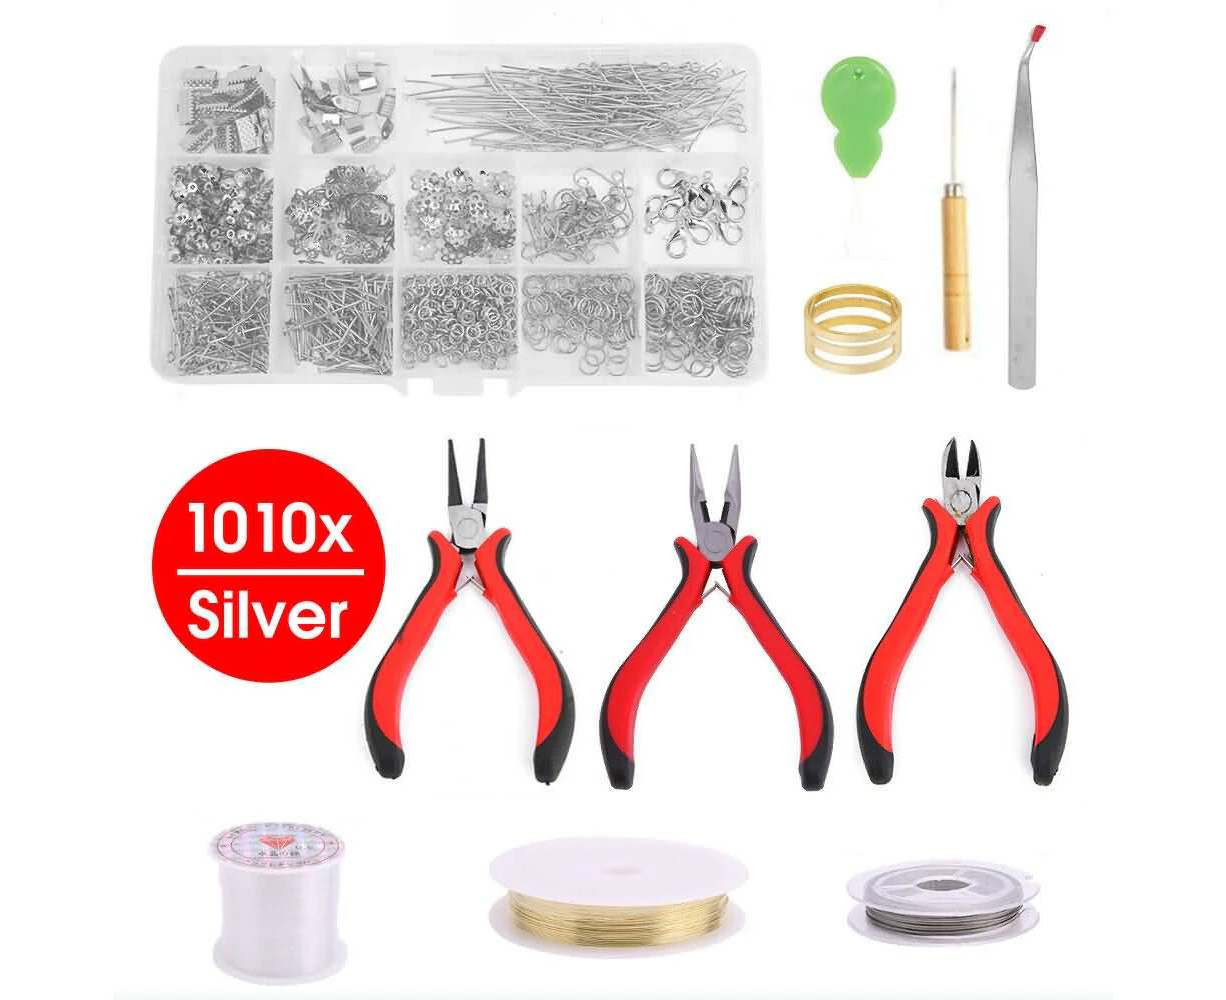 1763pcs Jewelry Making Supplies Kit - Jewelry Repair Tool With Accessories  Jewelry Pliers Jewelry Findings And Beading Wires For Adults And Beginners